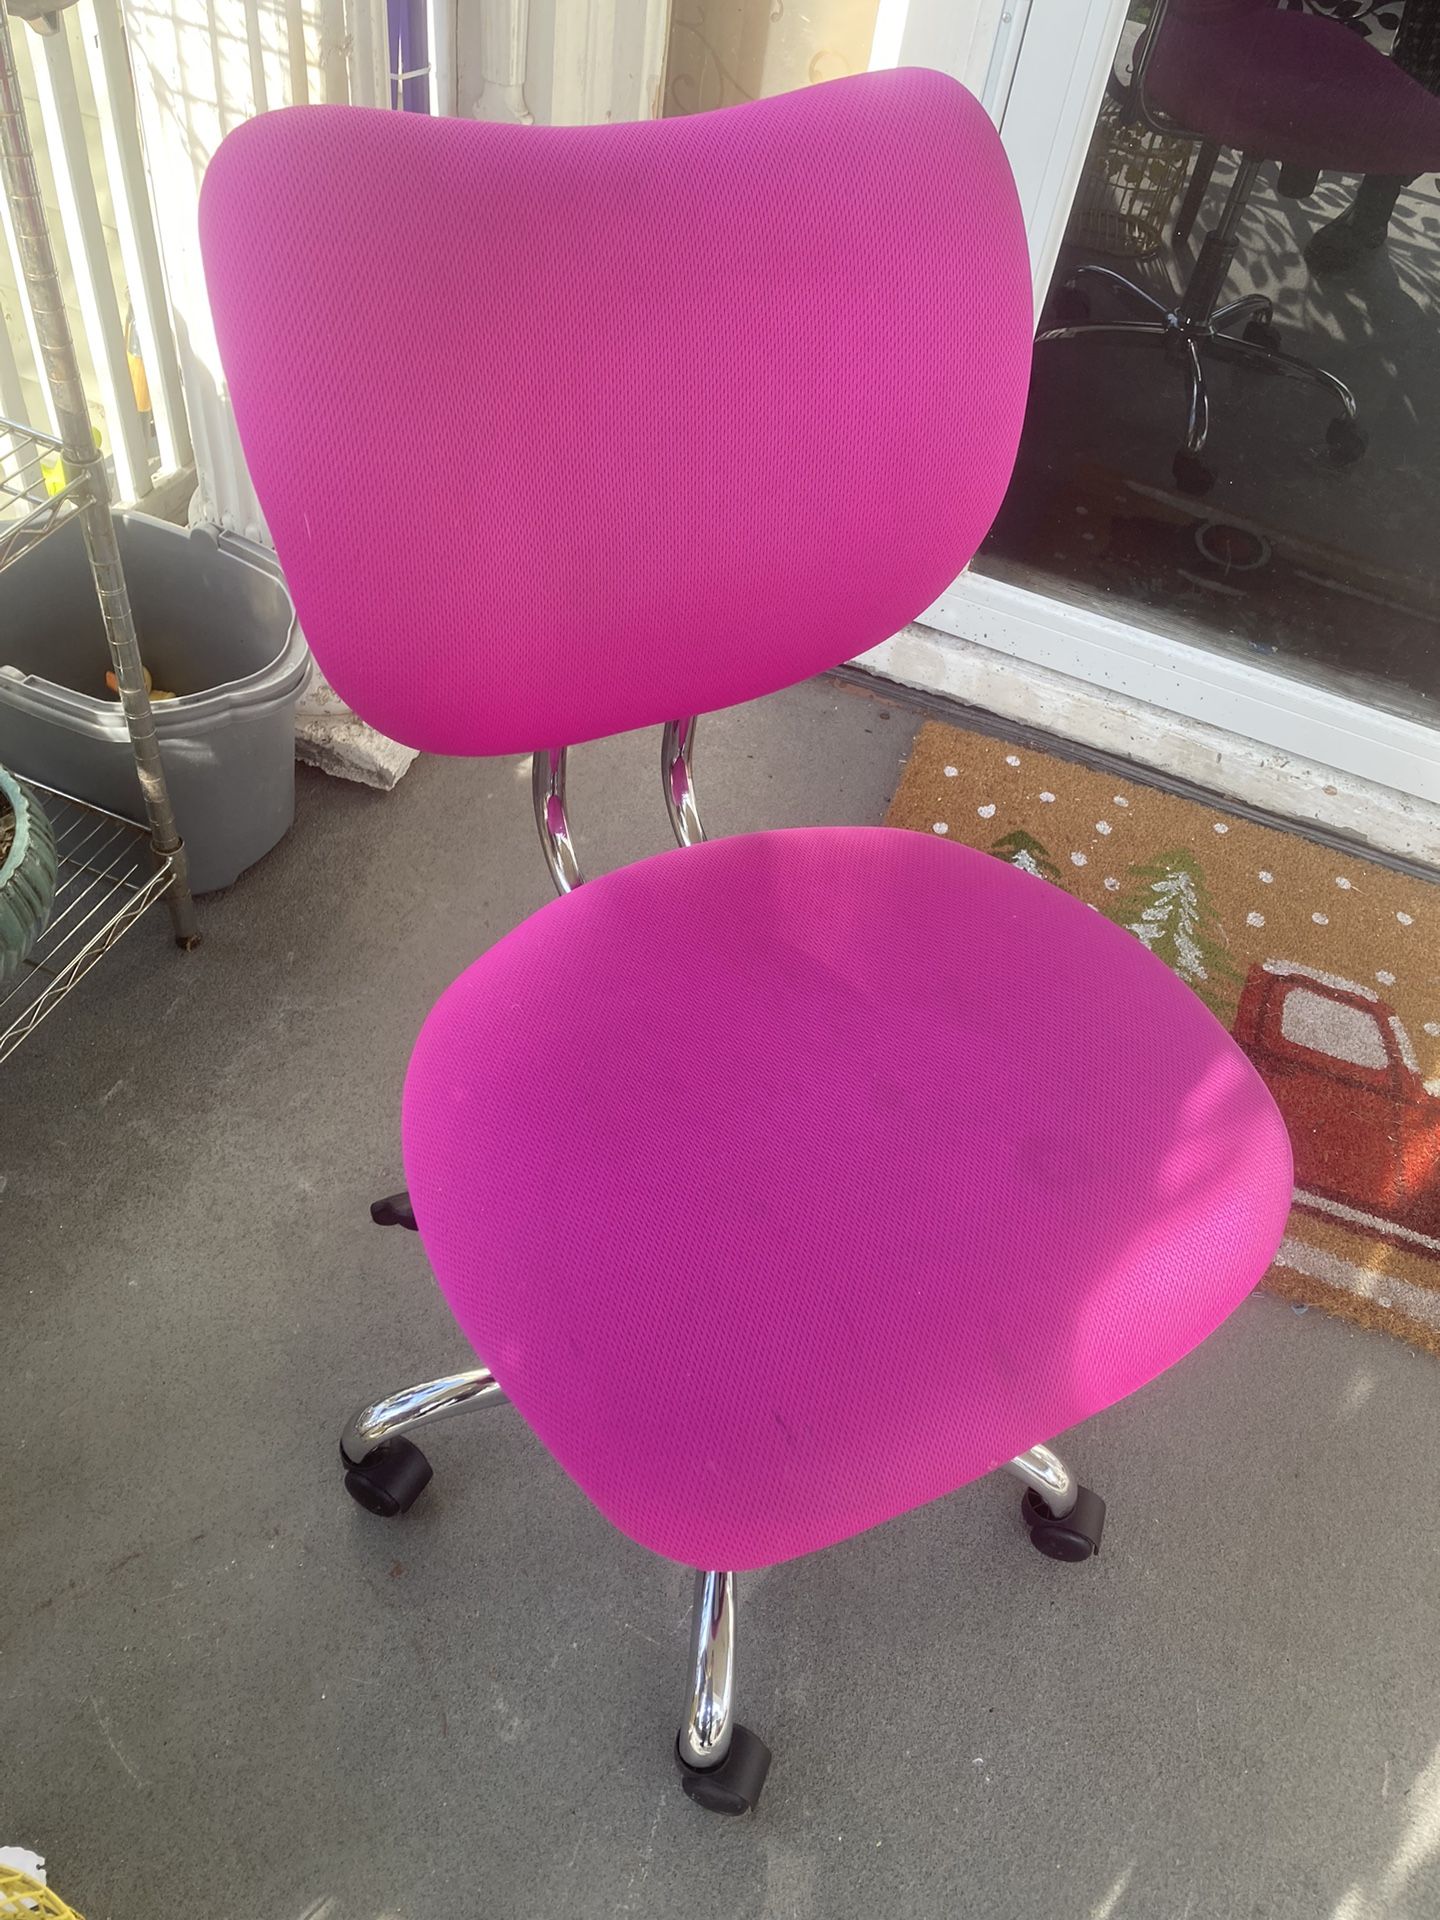 Chair, perfect for vanity chair, Fuchsia, Chrome, Very Sturdy And Well-Made, $50 Firm, Ghent Beautiful Desk Chair,